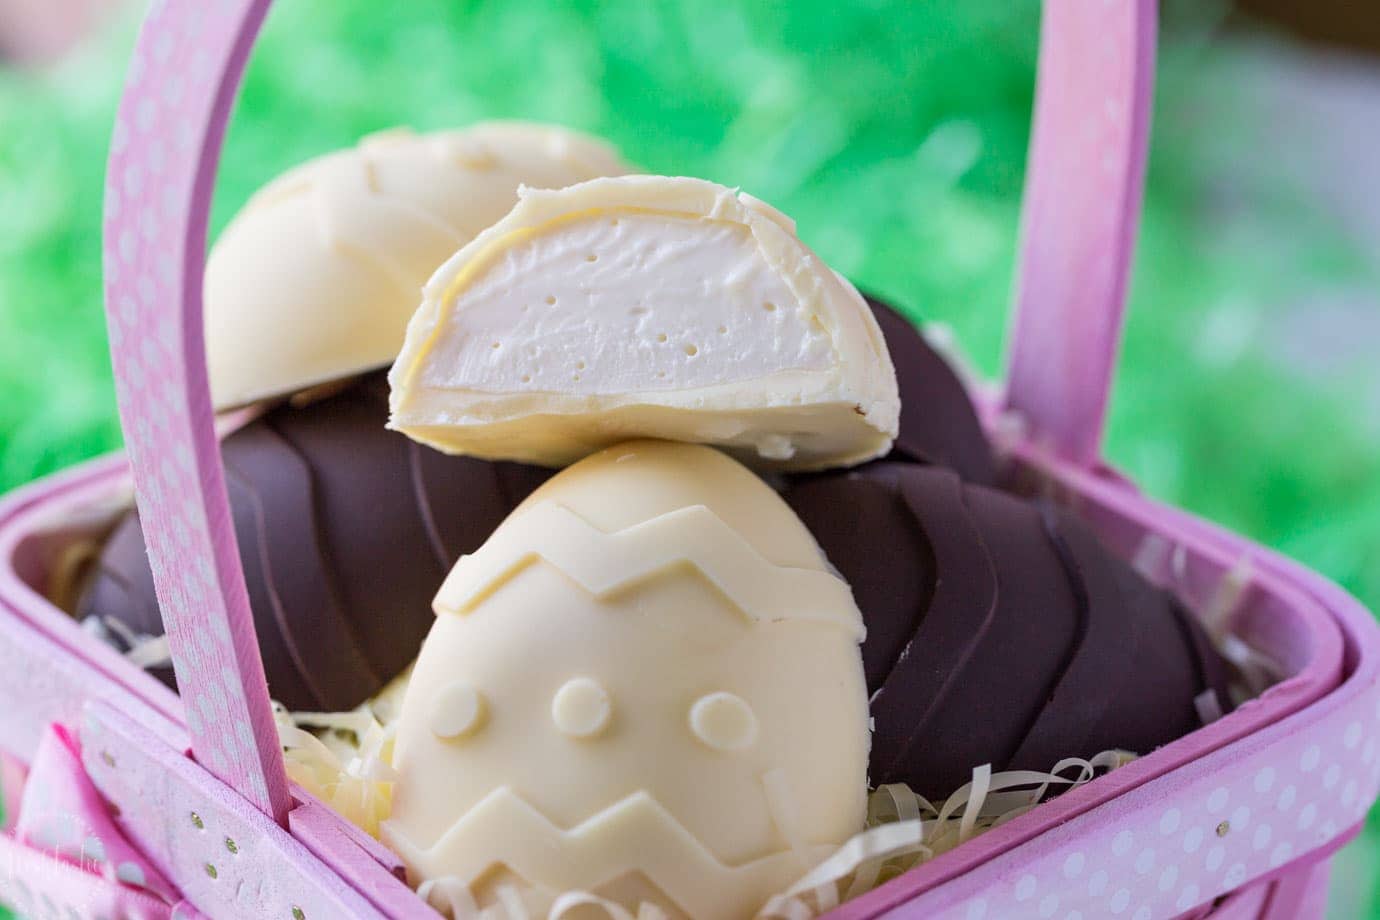 Homemade chocolate eggs stuffed with Cheesecake, so FUN and NO BAKE! The kids will love it, A perfect Easter Candy that's gluten free too!